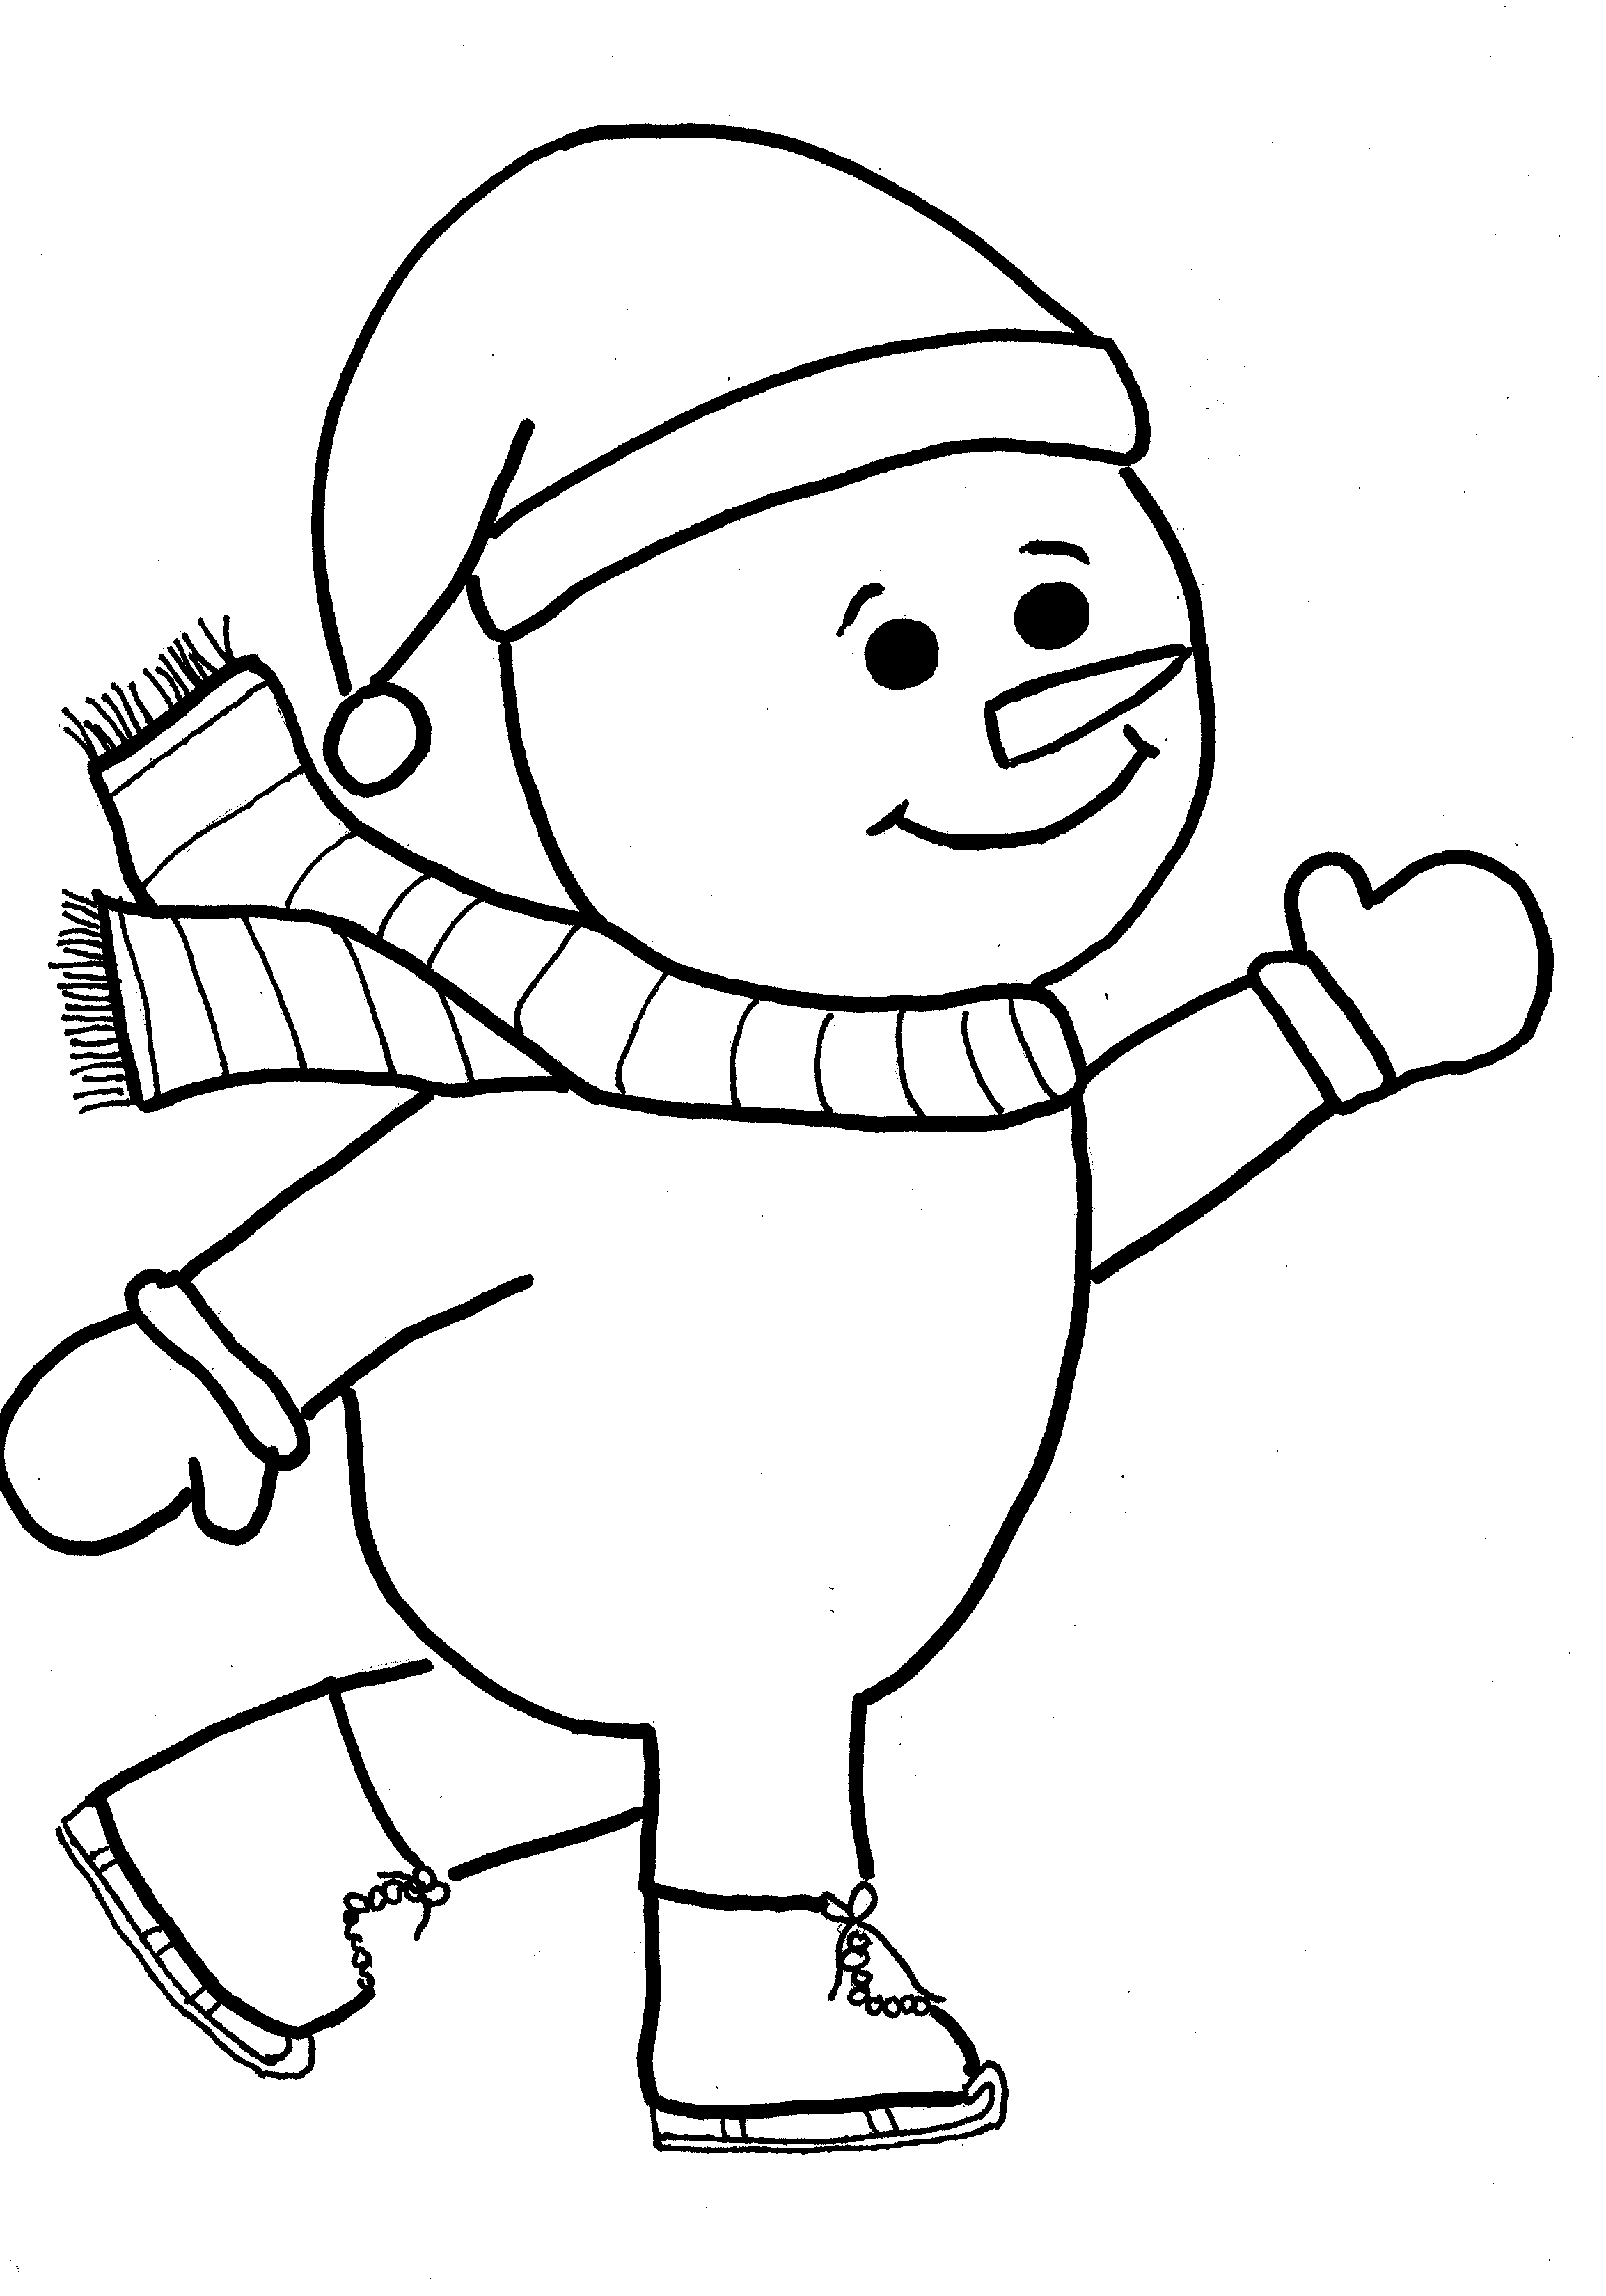 Printable Coloring Pages Christmas Snowman - Coloring Home